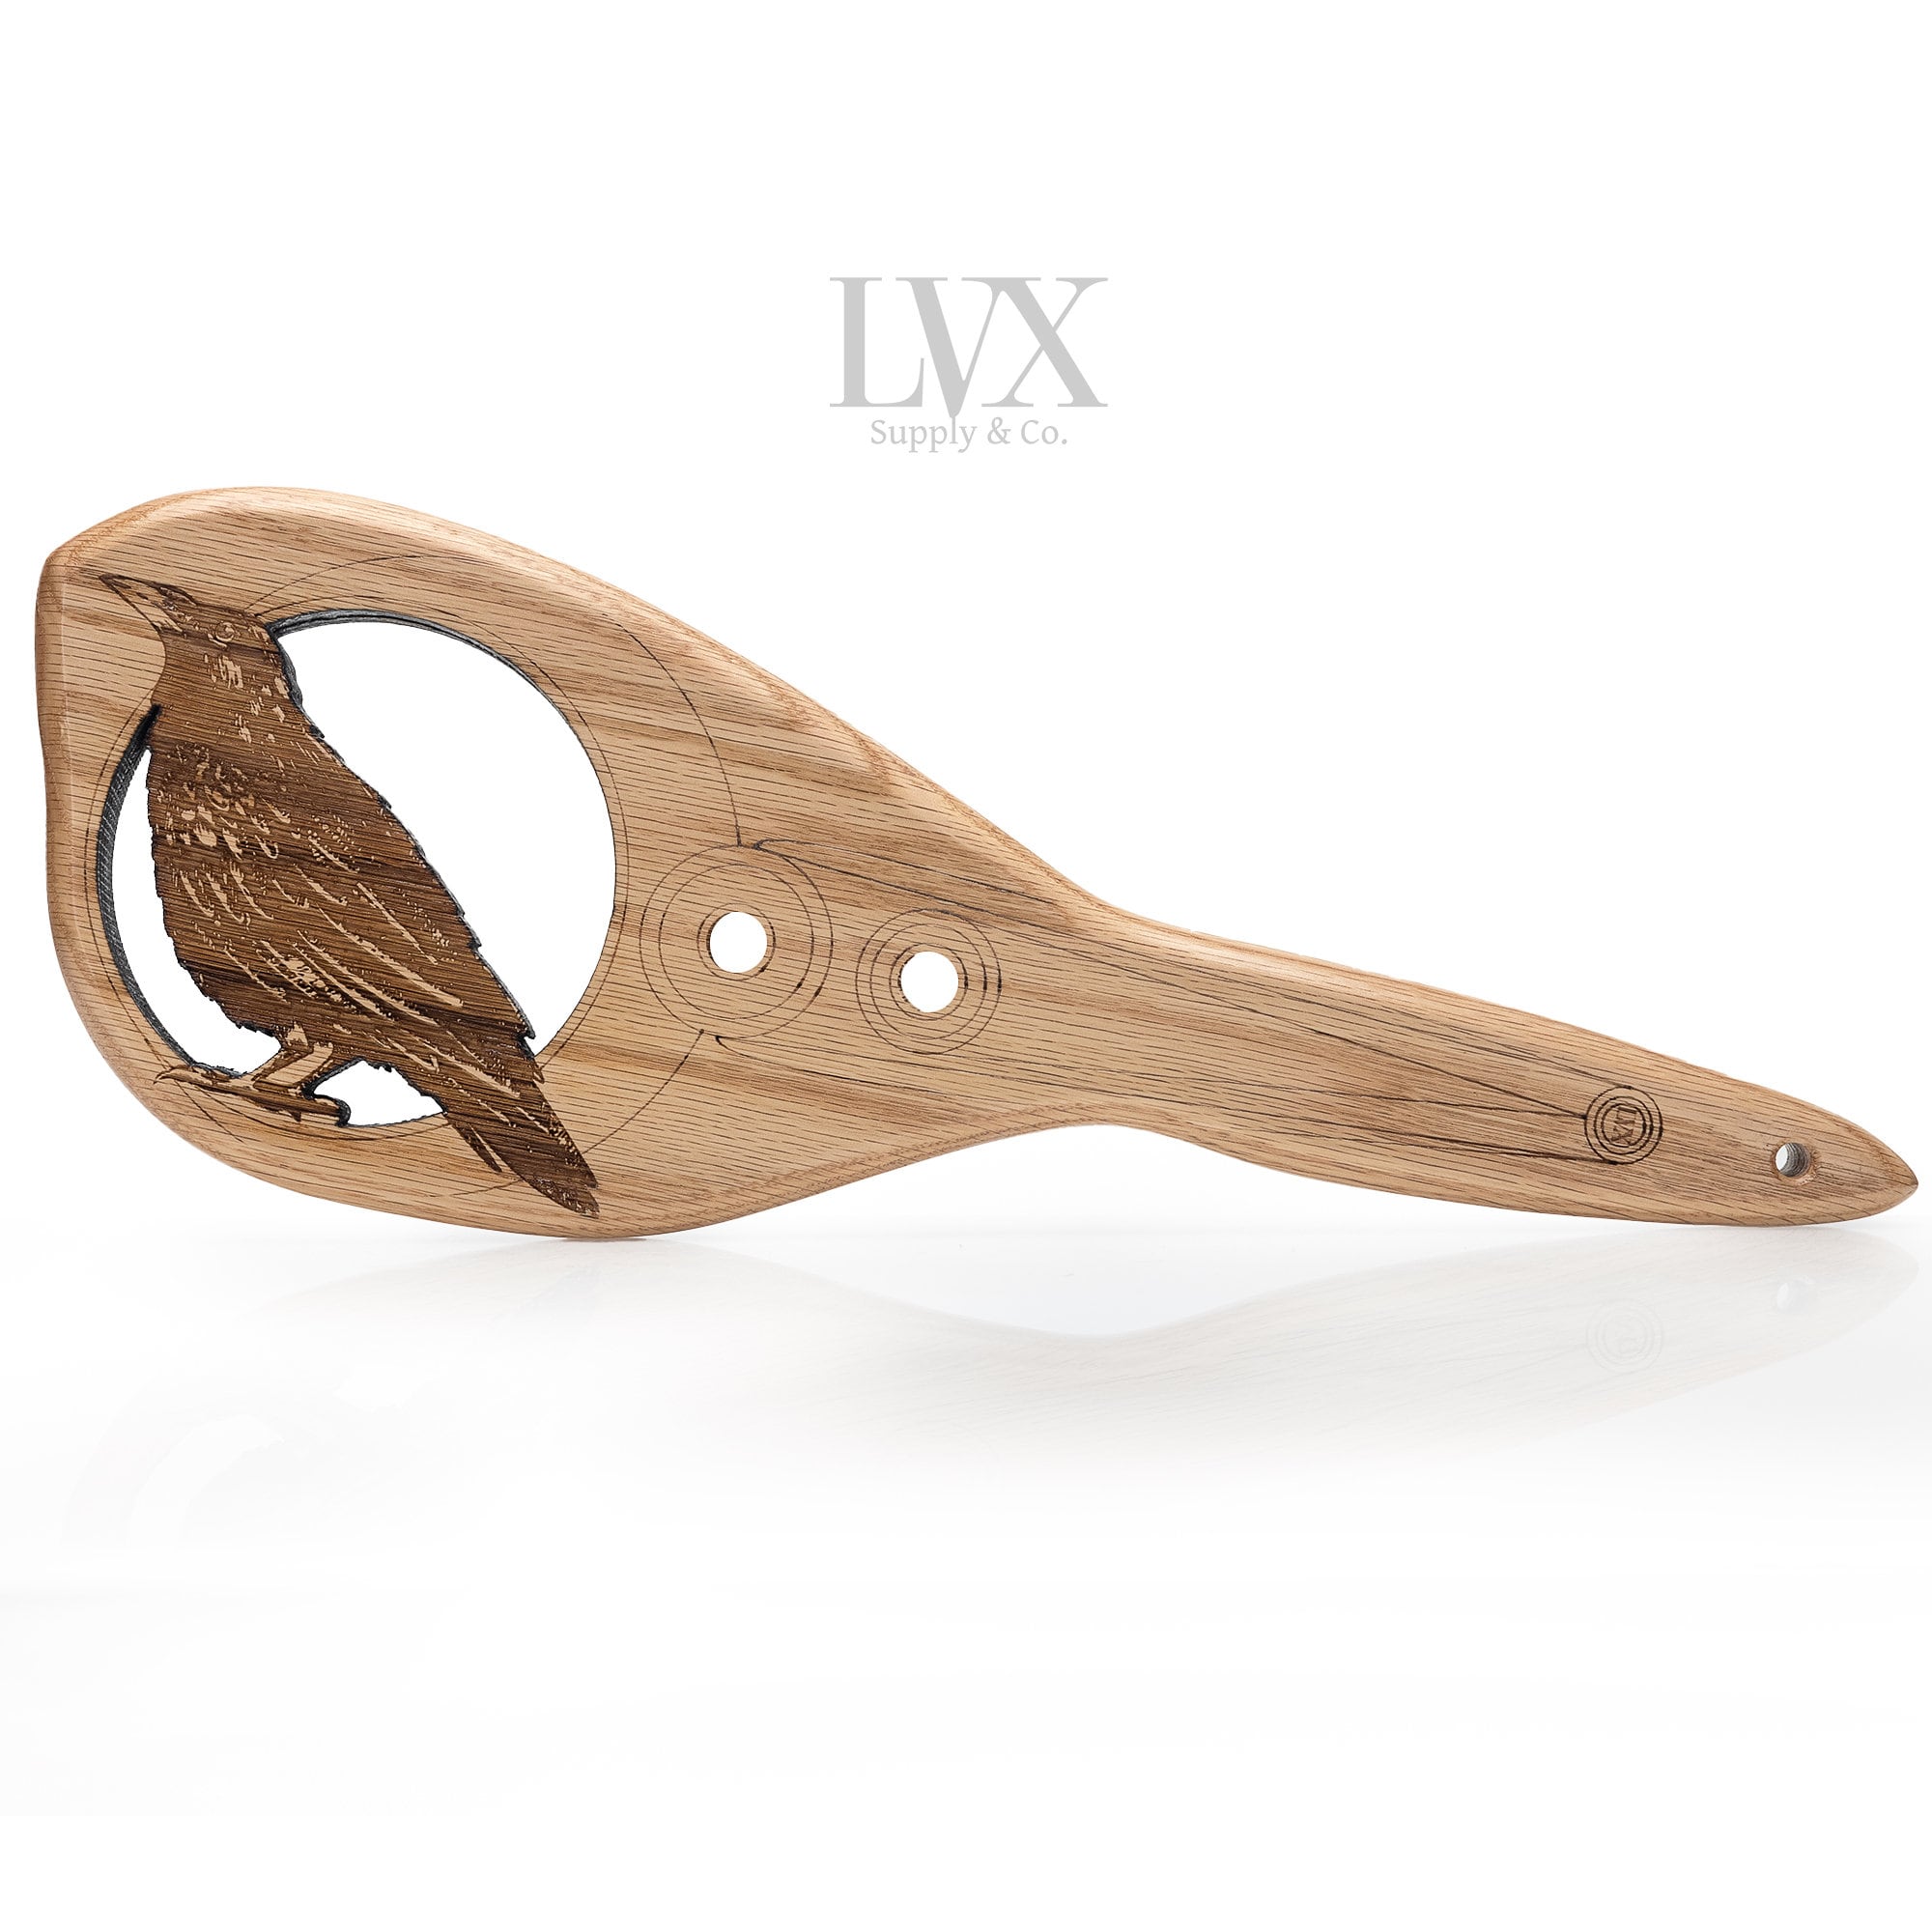 Raven Spanking Paddle | Carved Wood Spanking Paddle for DDlg Submissive Slave Punishment | Impact Toys BDsM-gear | BDSM Paddle by LVX Supply photo